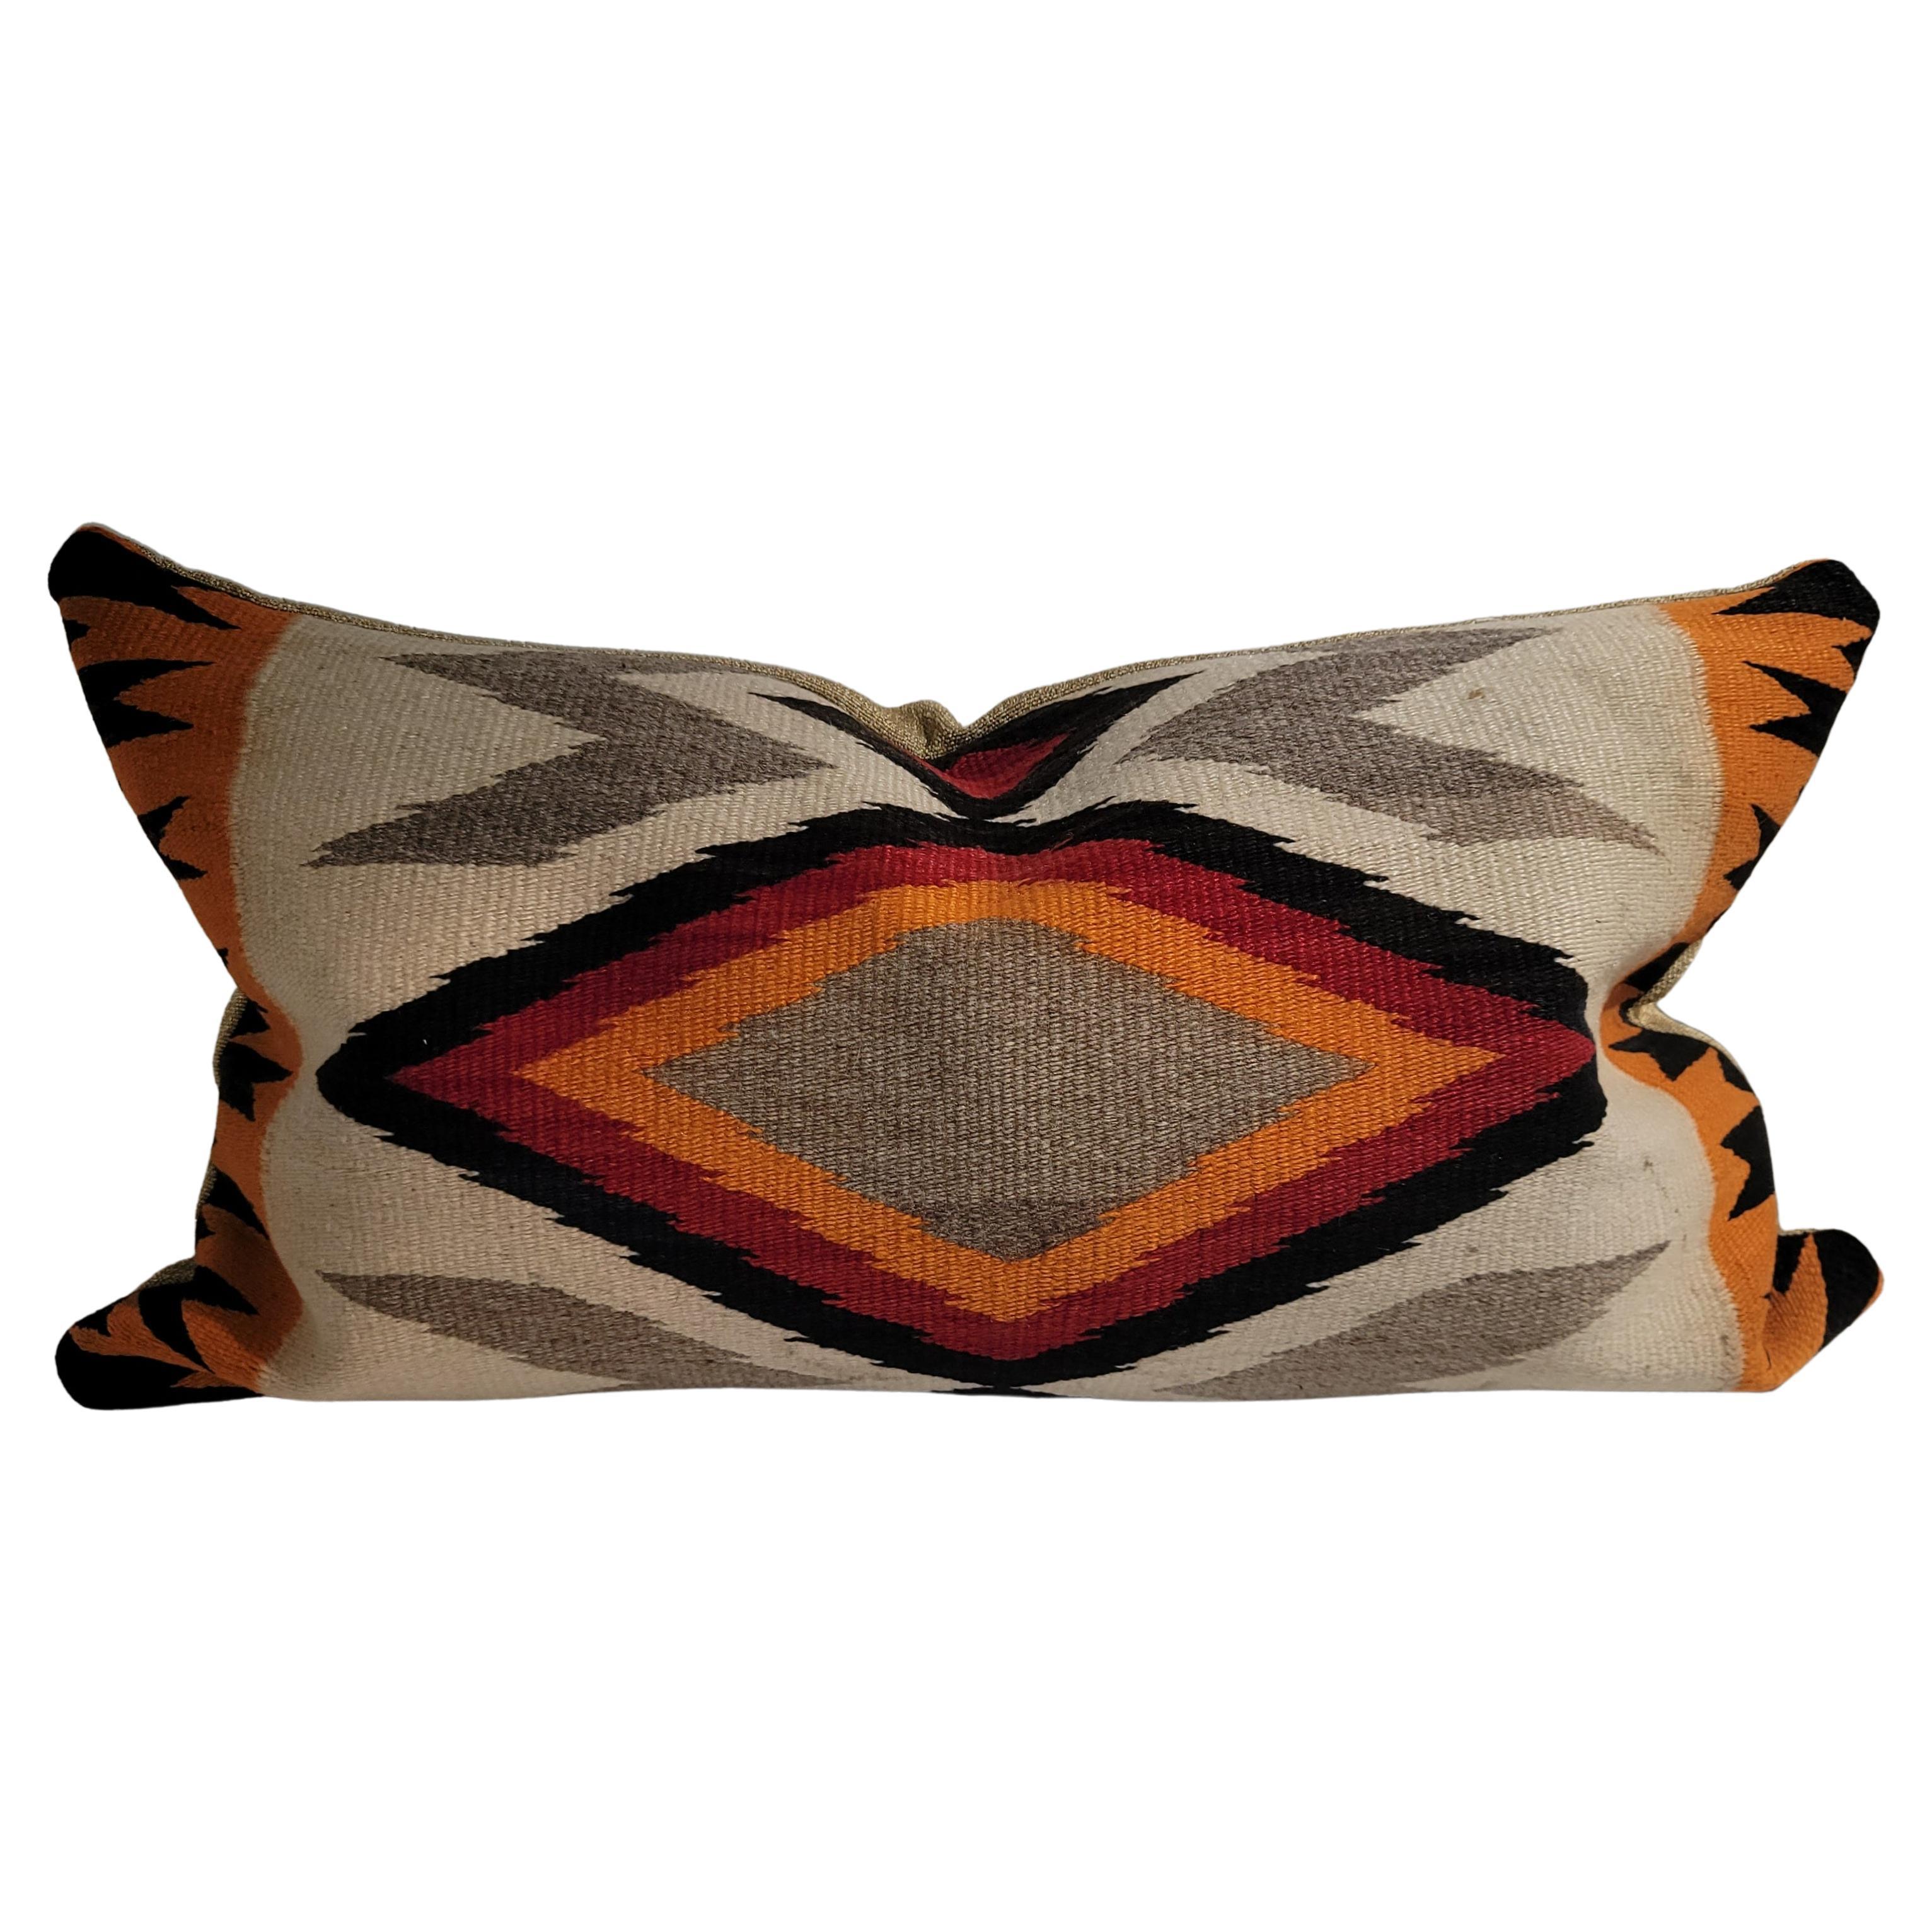 Early 20th Century Navajo Indian Weaving Pillow